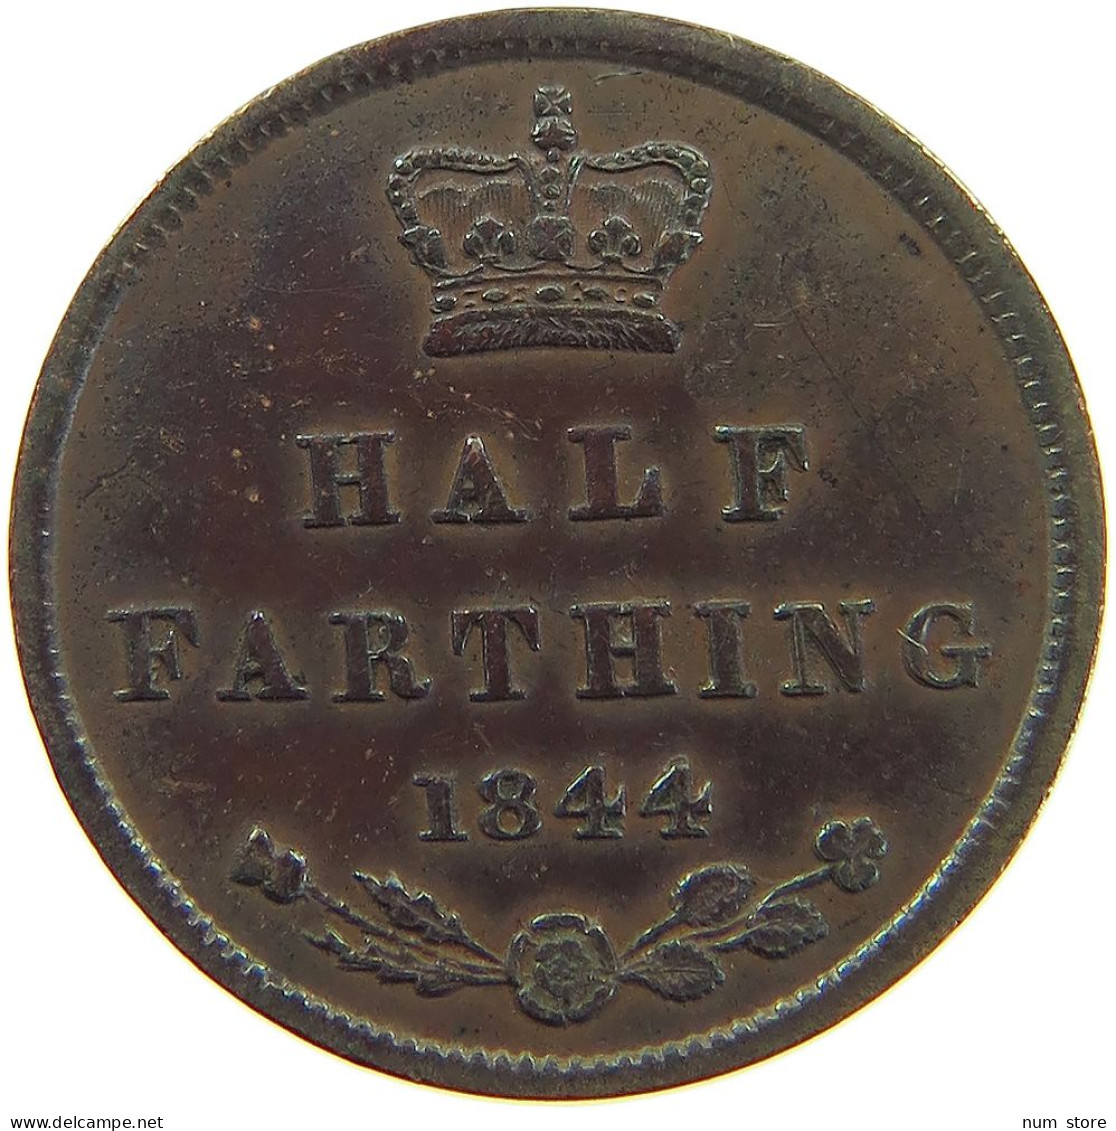 GREAT BRITAIN HALF FARTHING 1844 Victoria 1837-1901 #t005 0371 - A. 1/4 - 1/3 - 1/2 Farthing